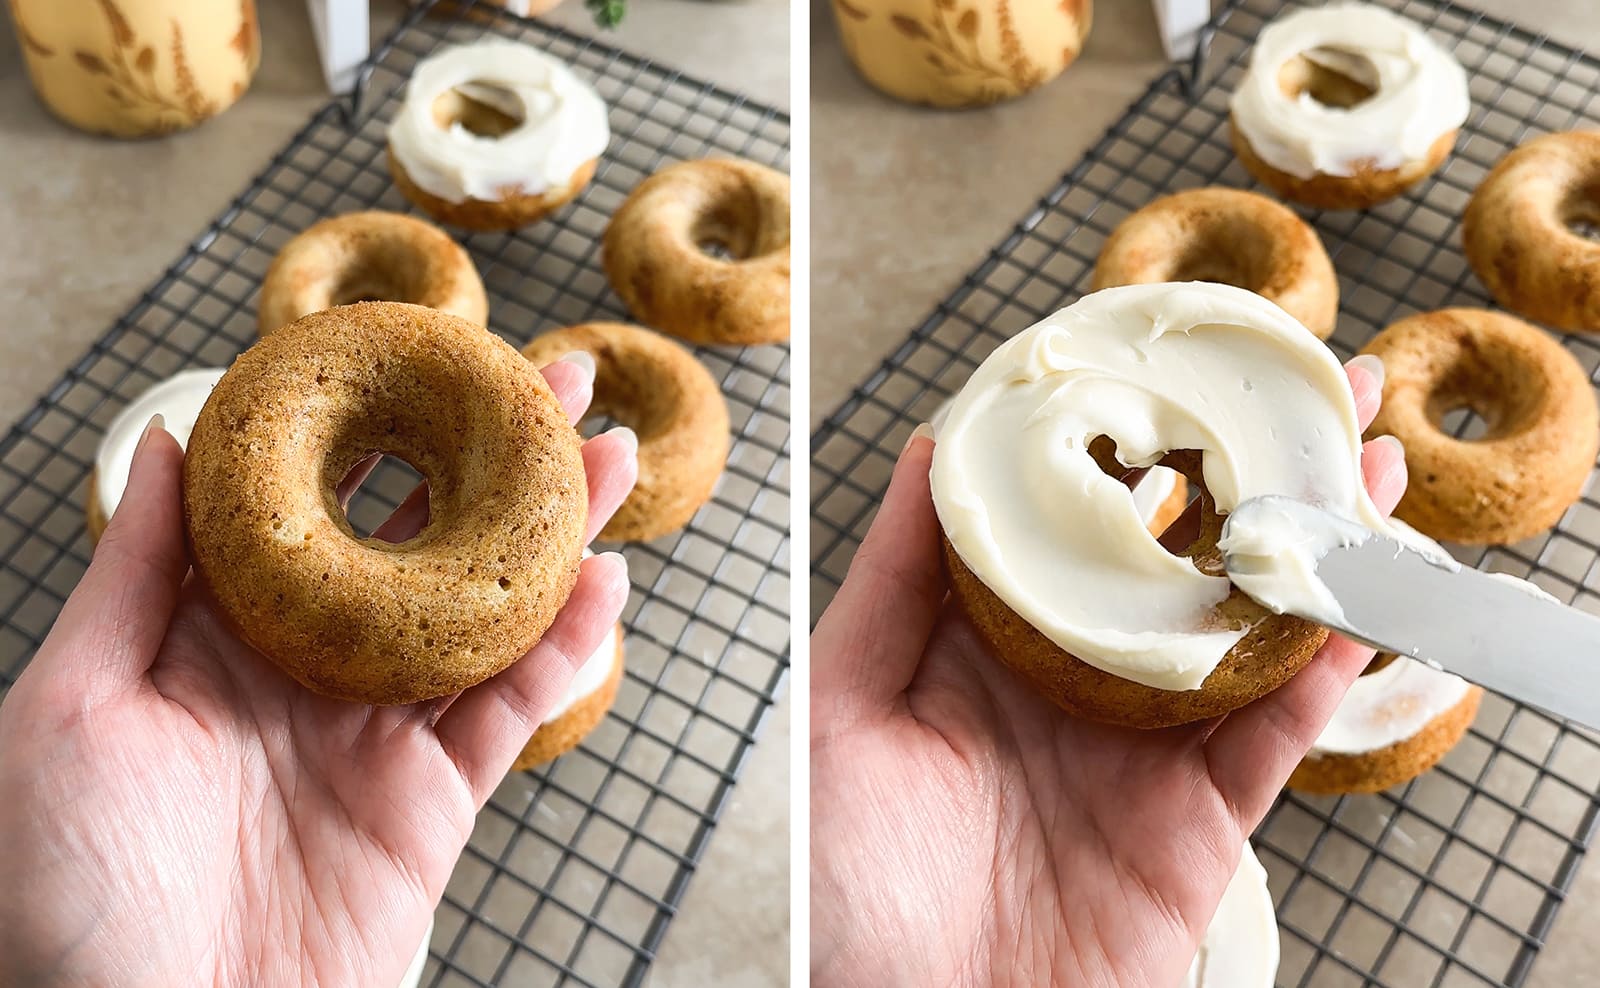 Left to right: hand holding a donut without frosting, spreading cream cheese frosting on top of donut.